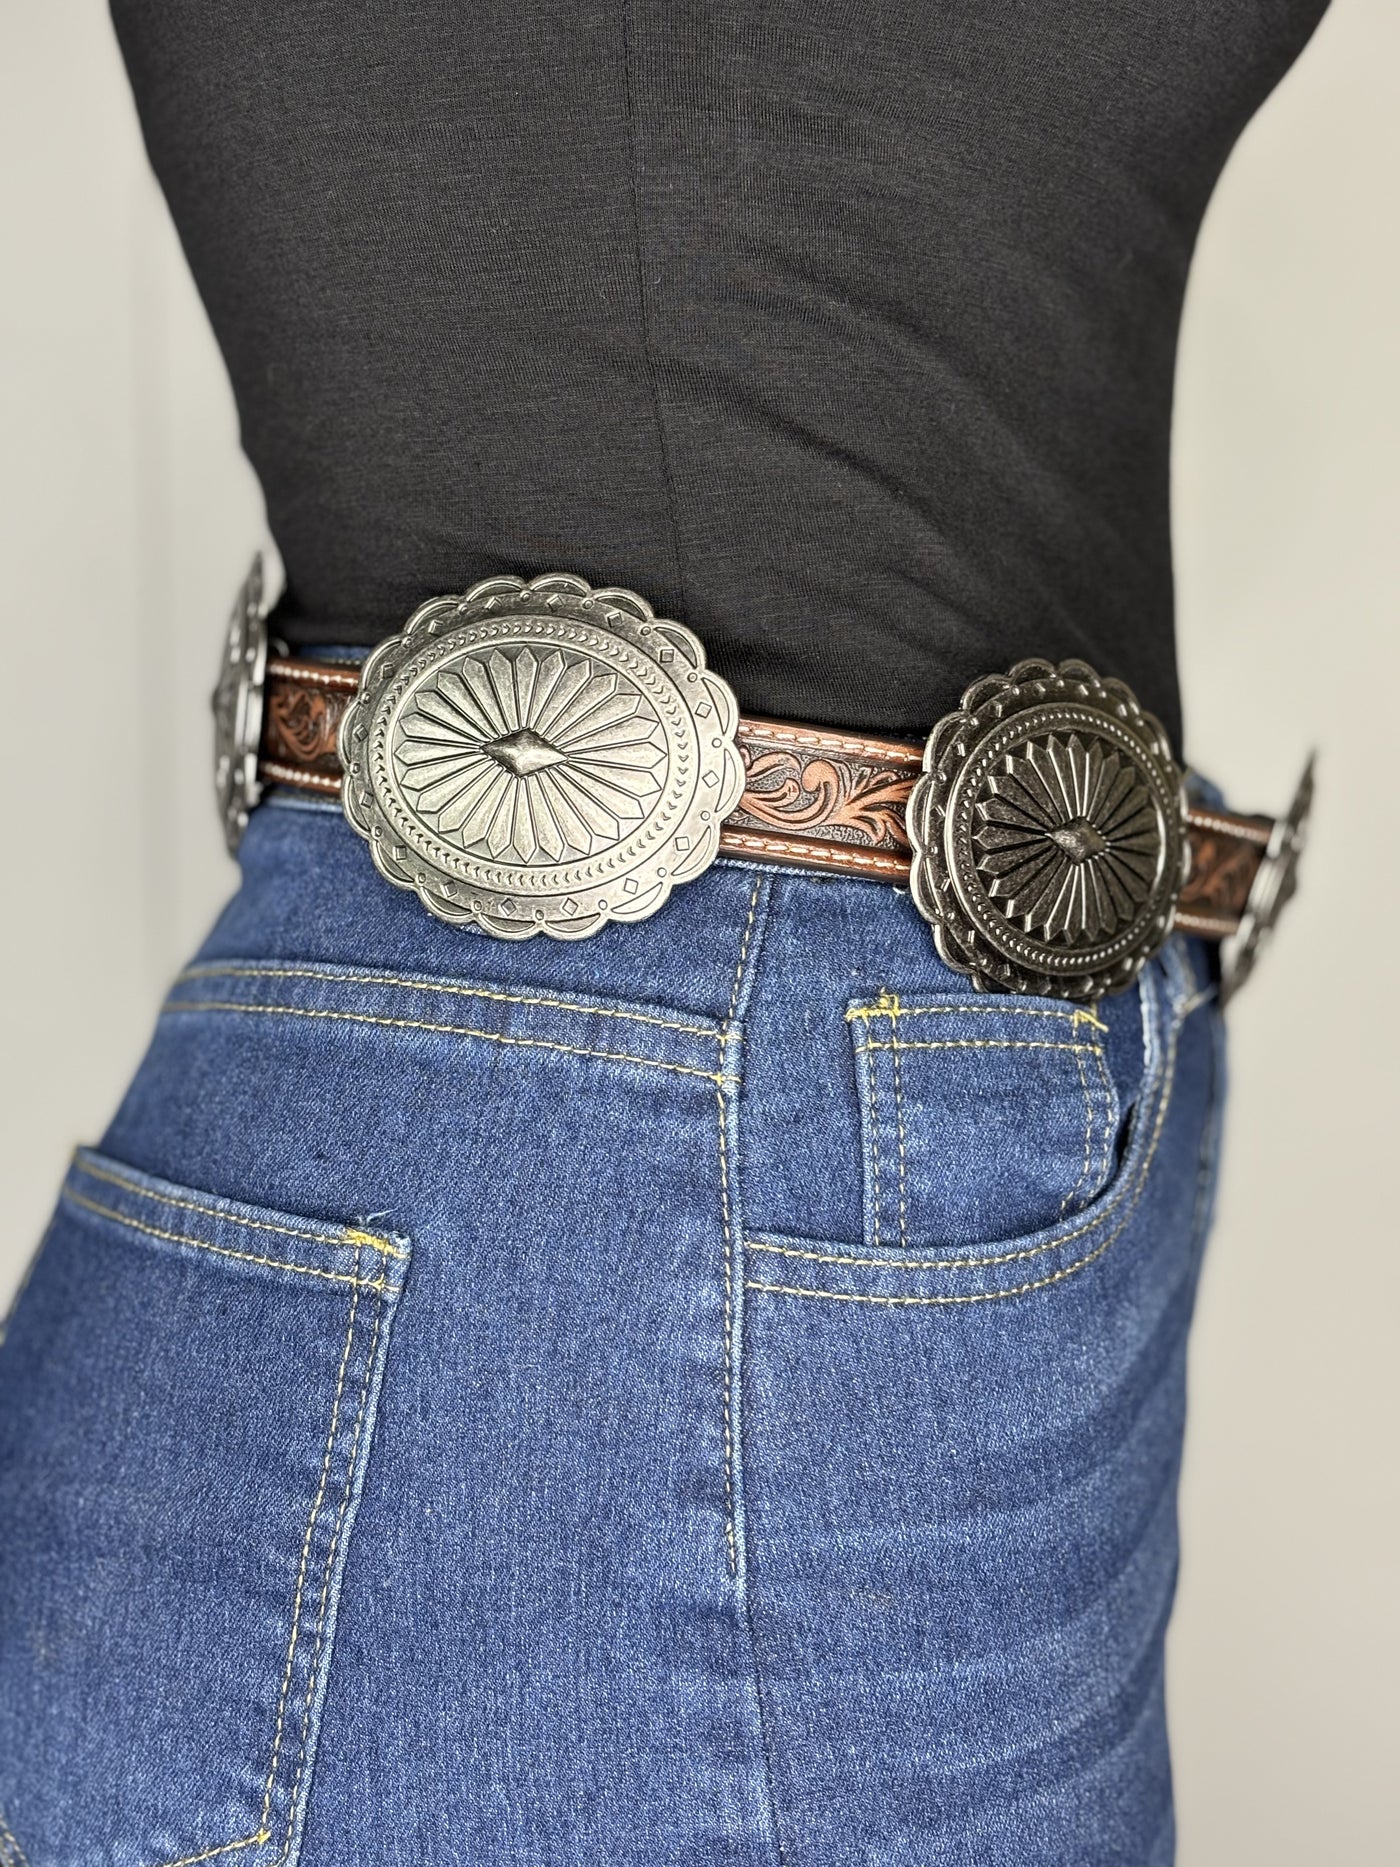 Floral Oval Concho Belt by Ariat